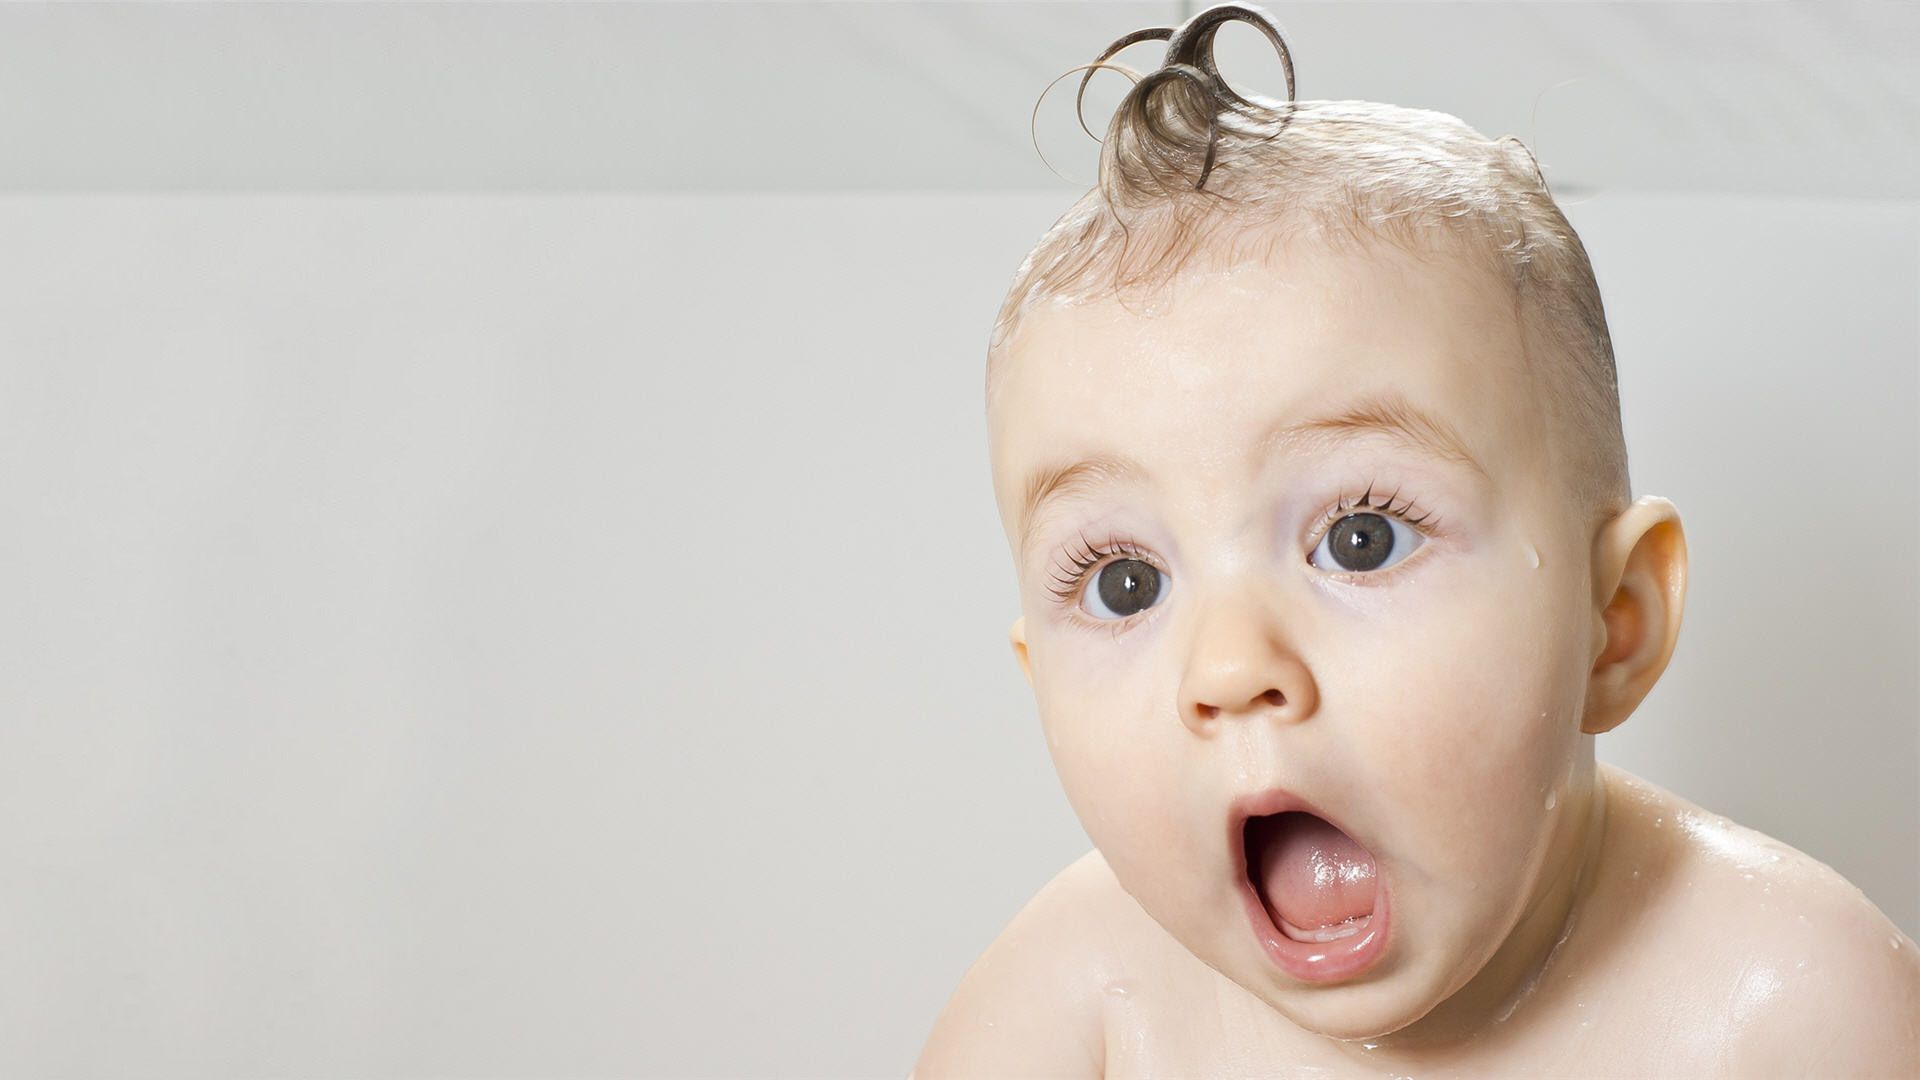 Funny Wallpaper Portrait. Funny babies, Funny baby faces, Funny baby picture